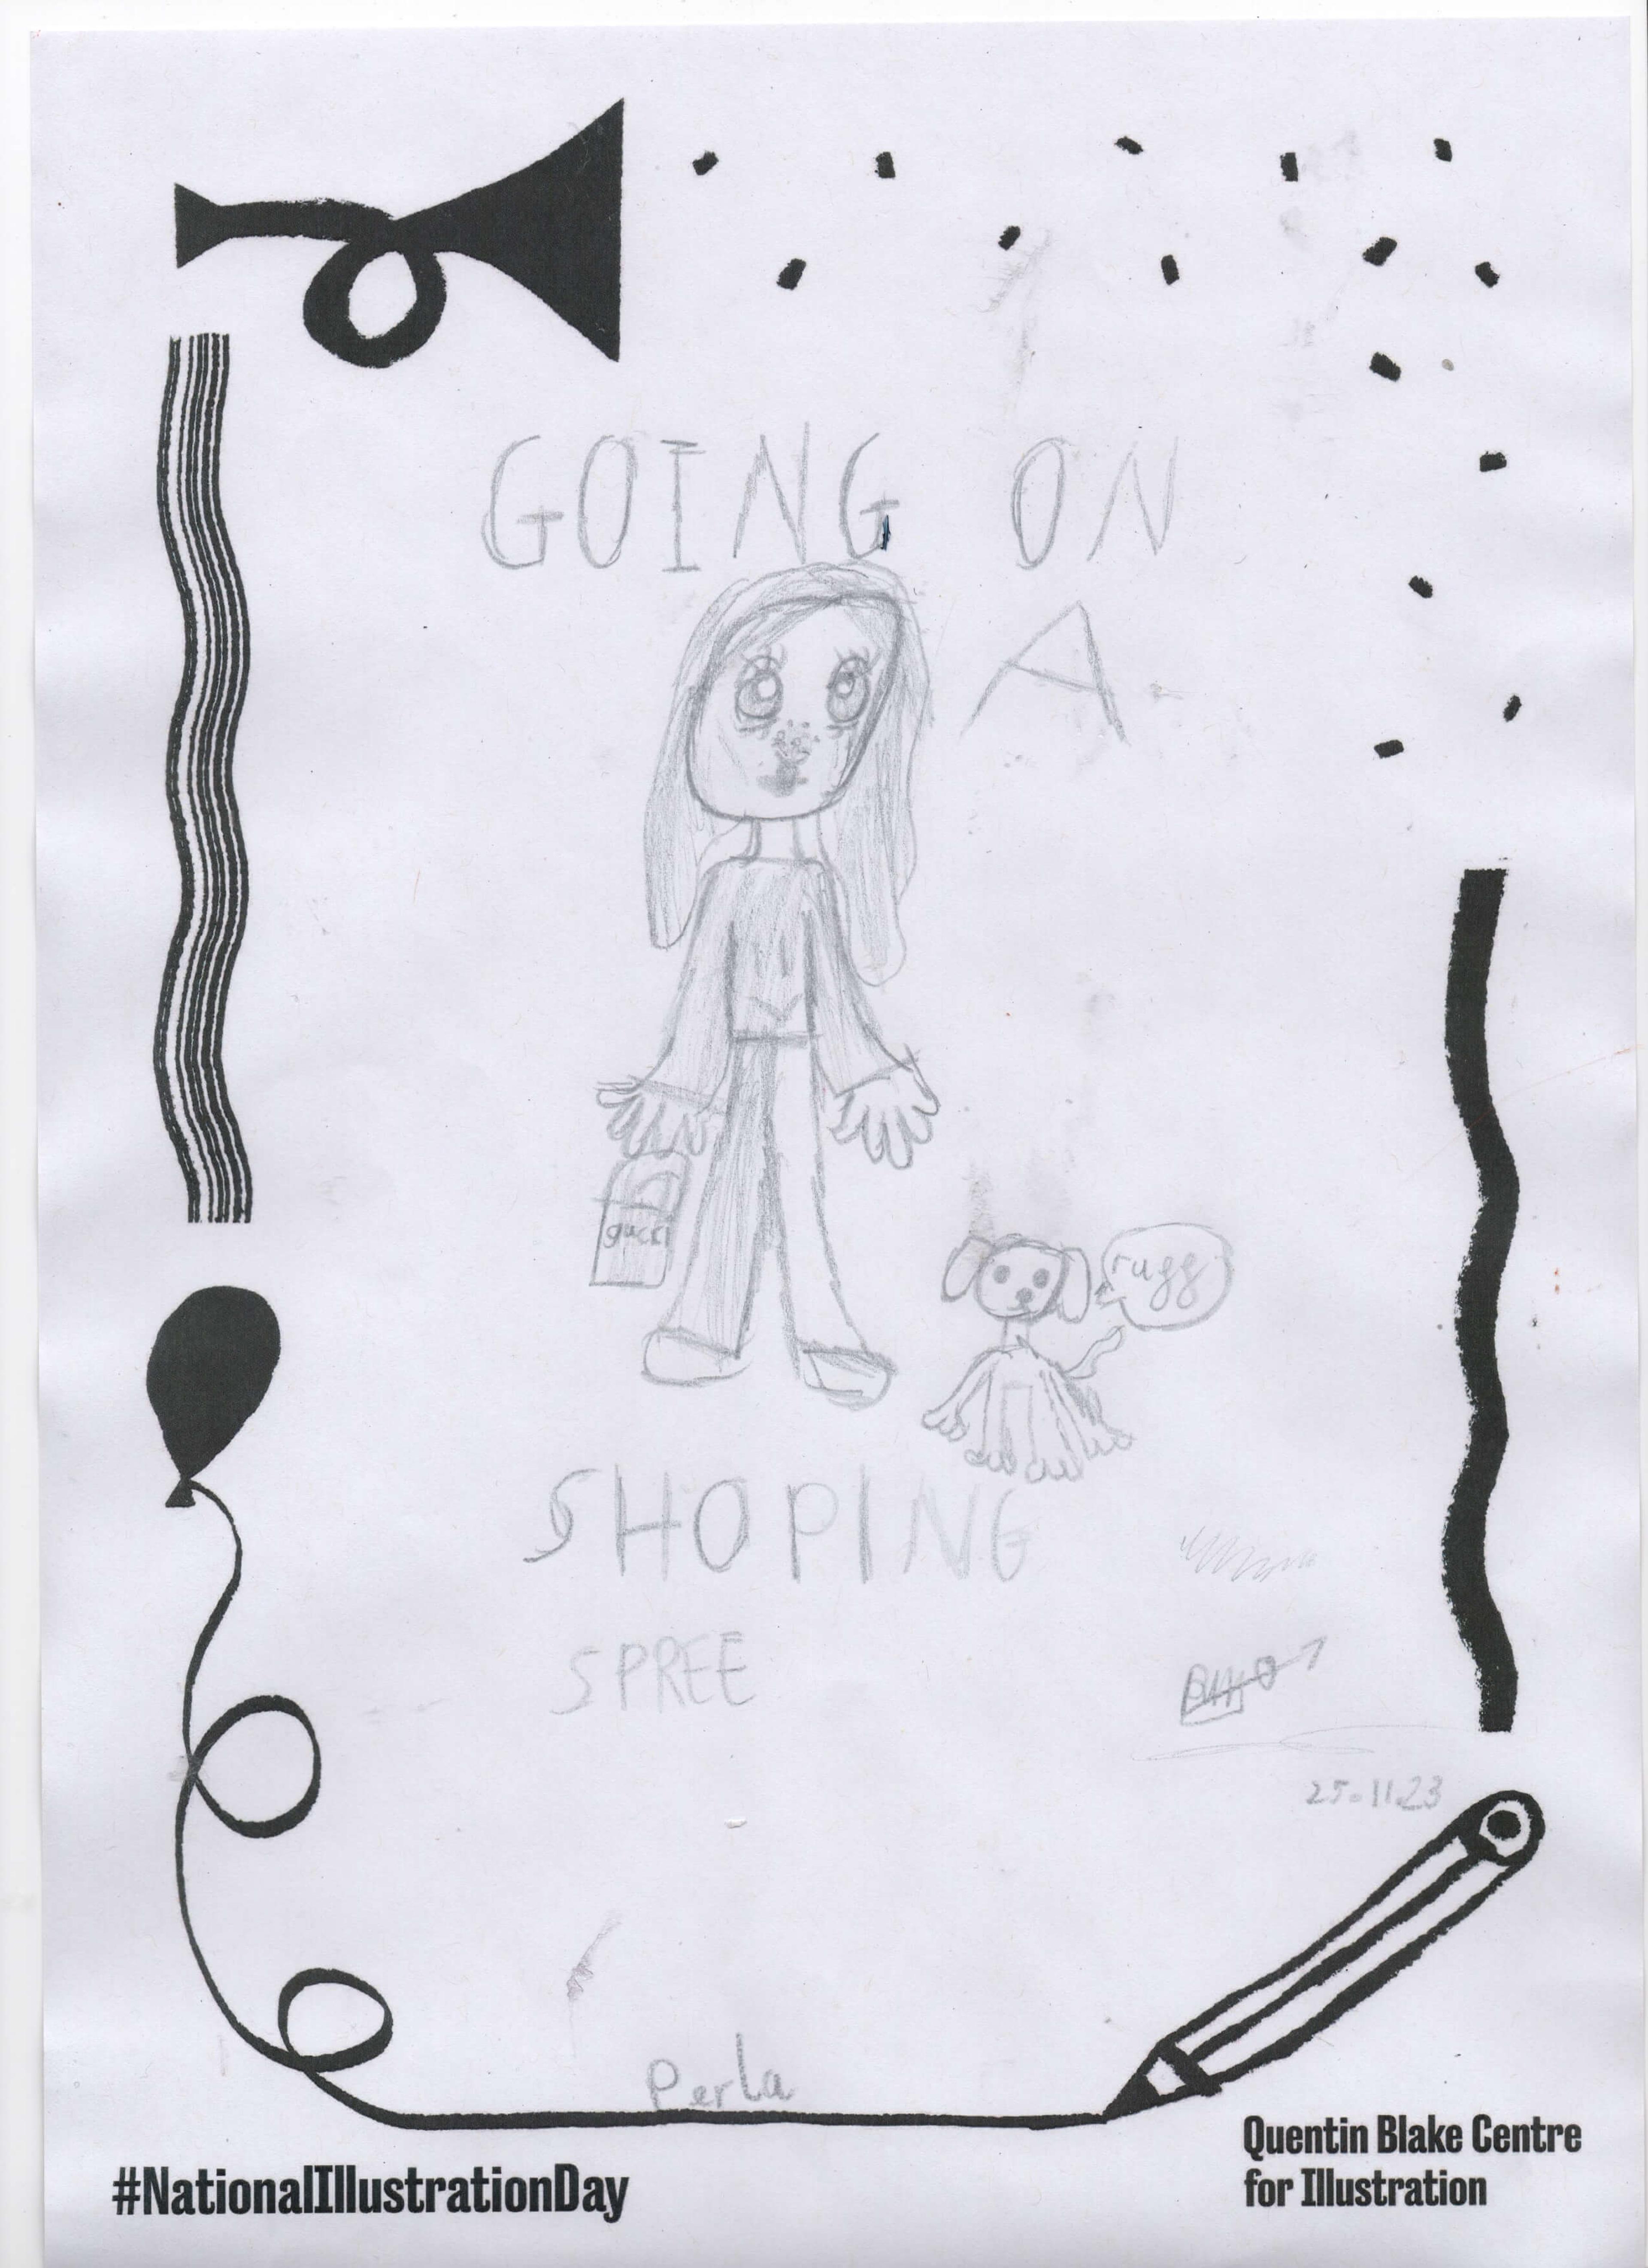 Pencil drawing of a fashionable child and a small dog with the words "going on a shopping spree".